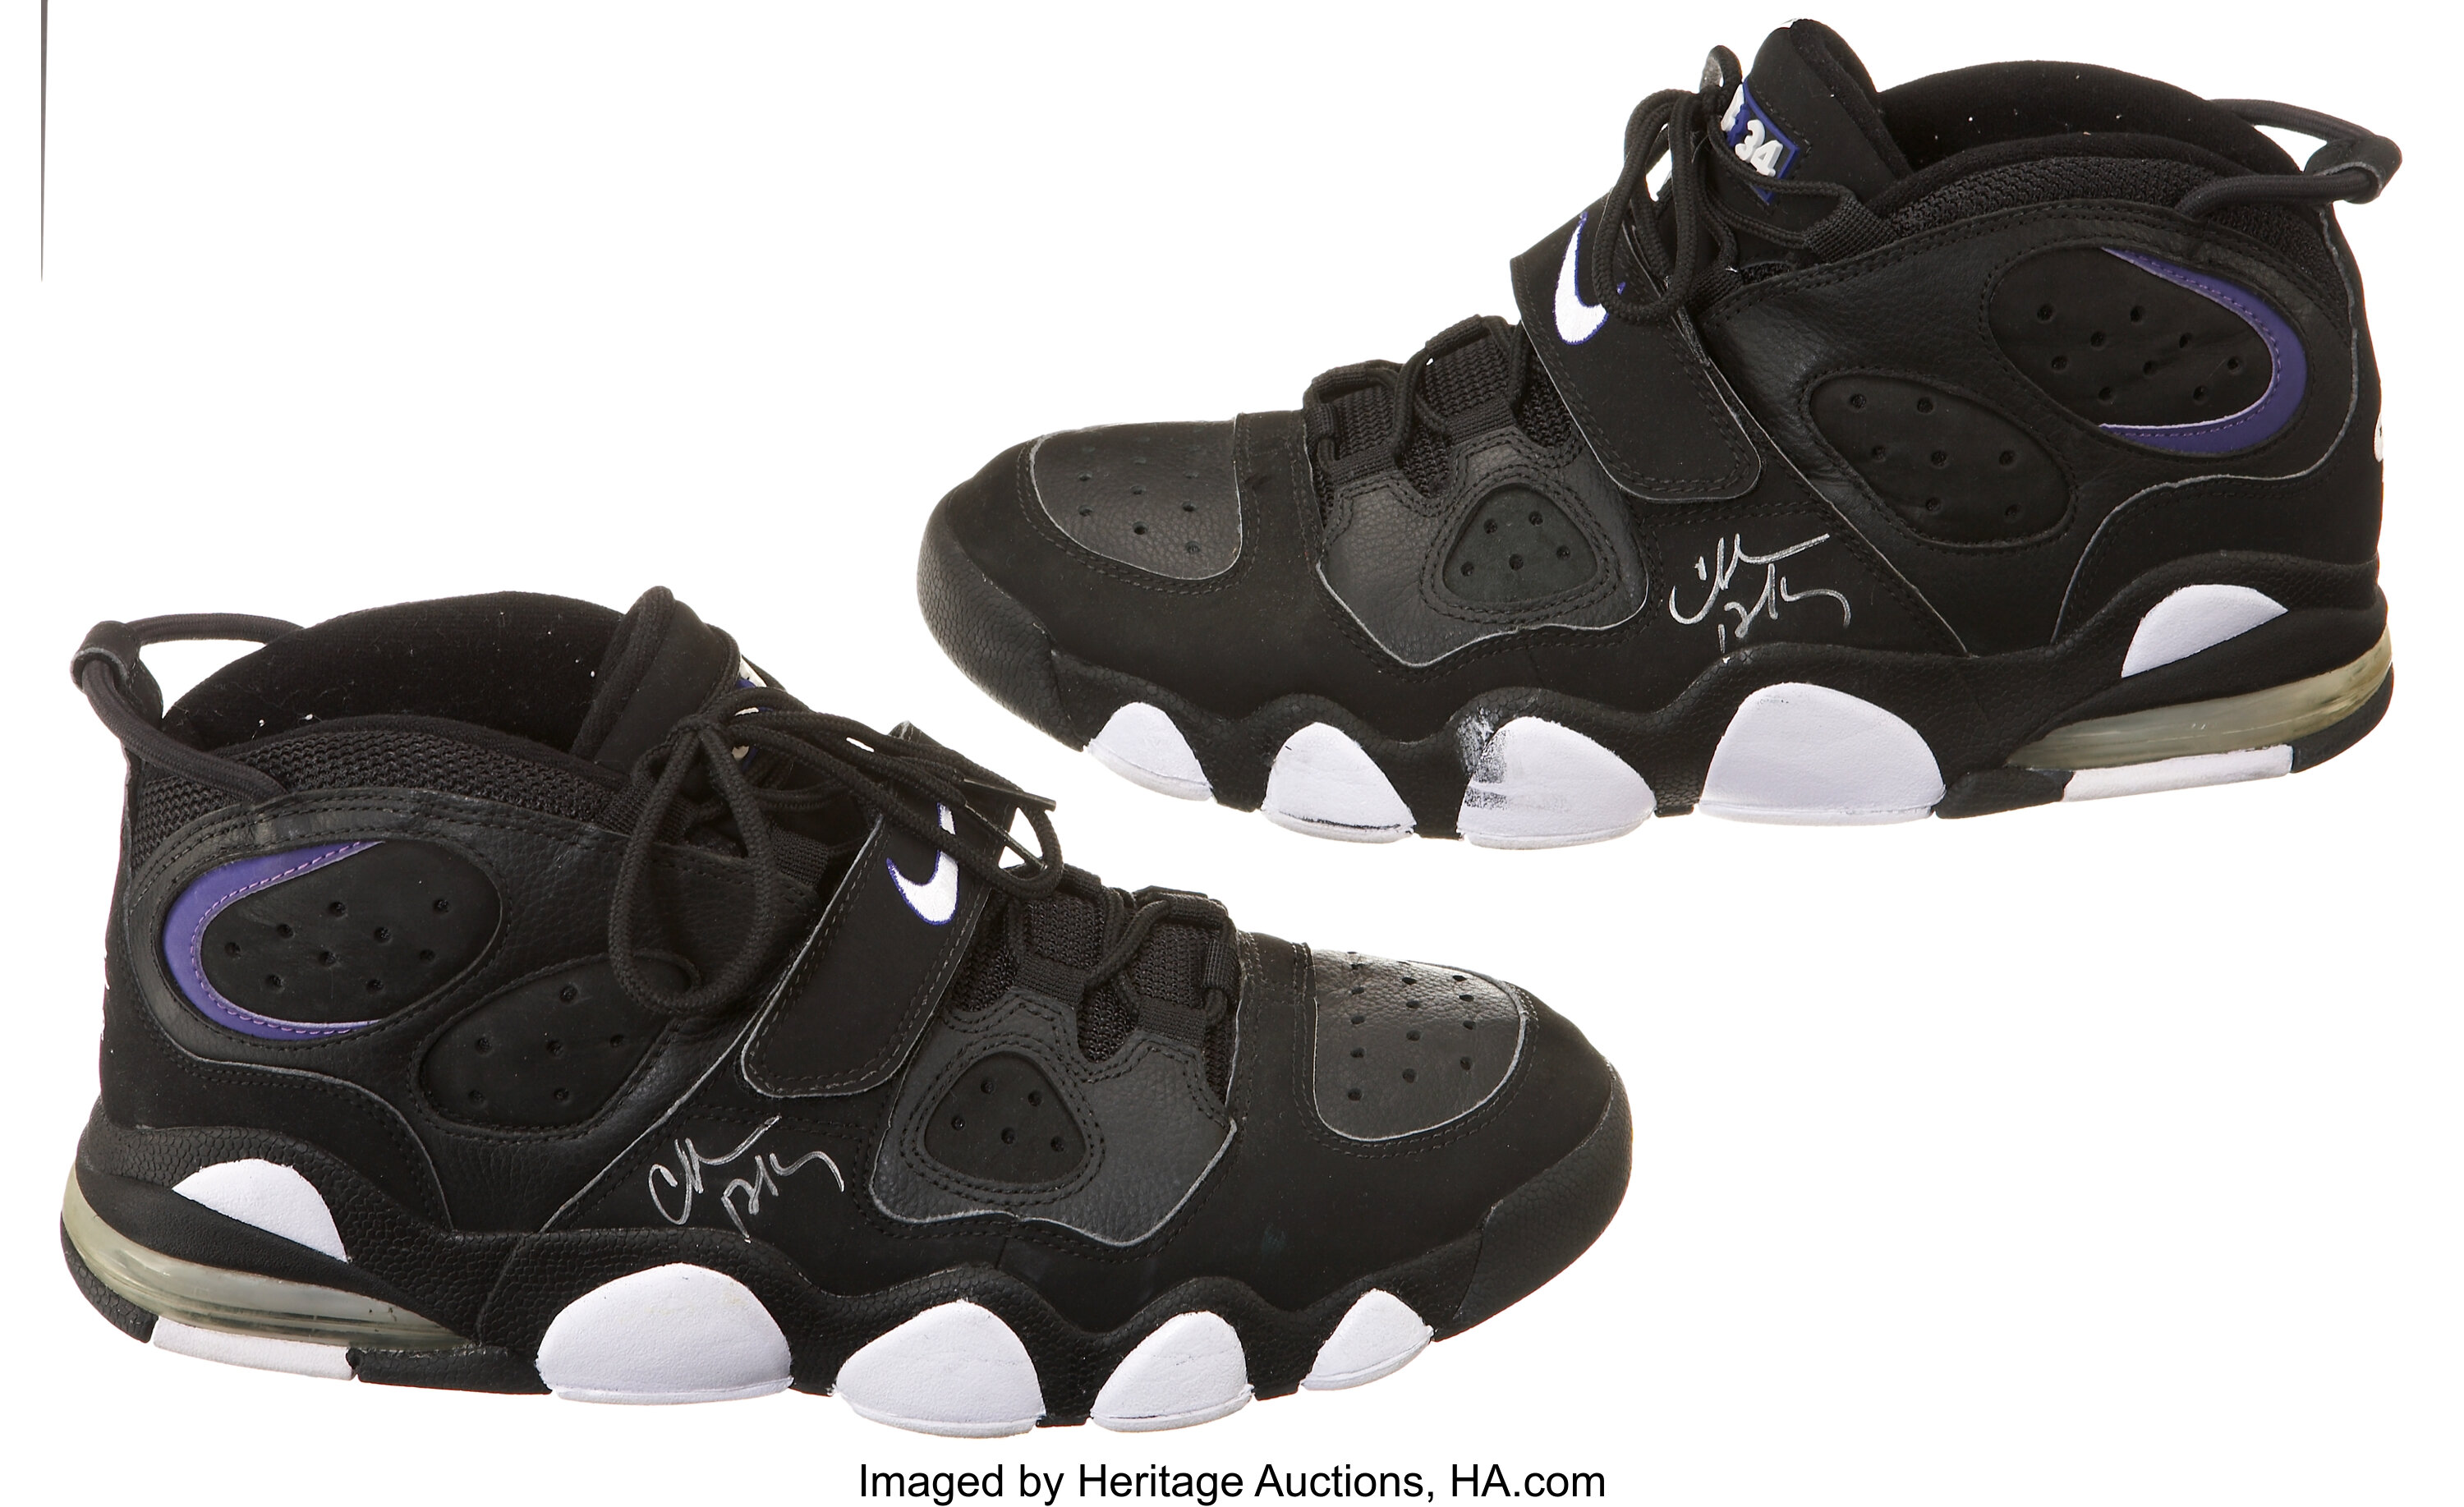 Circa mid-1990s Charles Barkley Game Worn & Signed Shoes.... | Lot #41156 |  Heritage Auctions